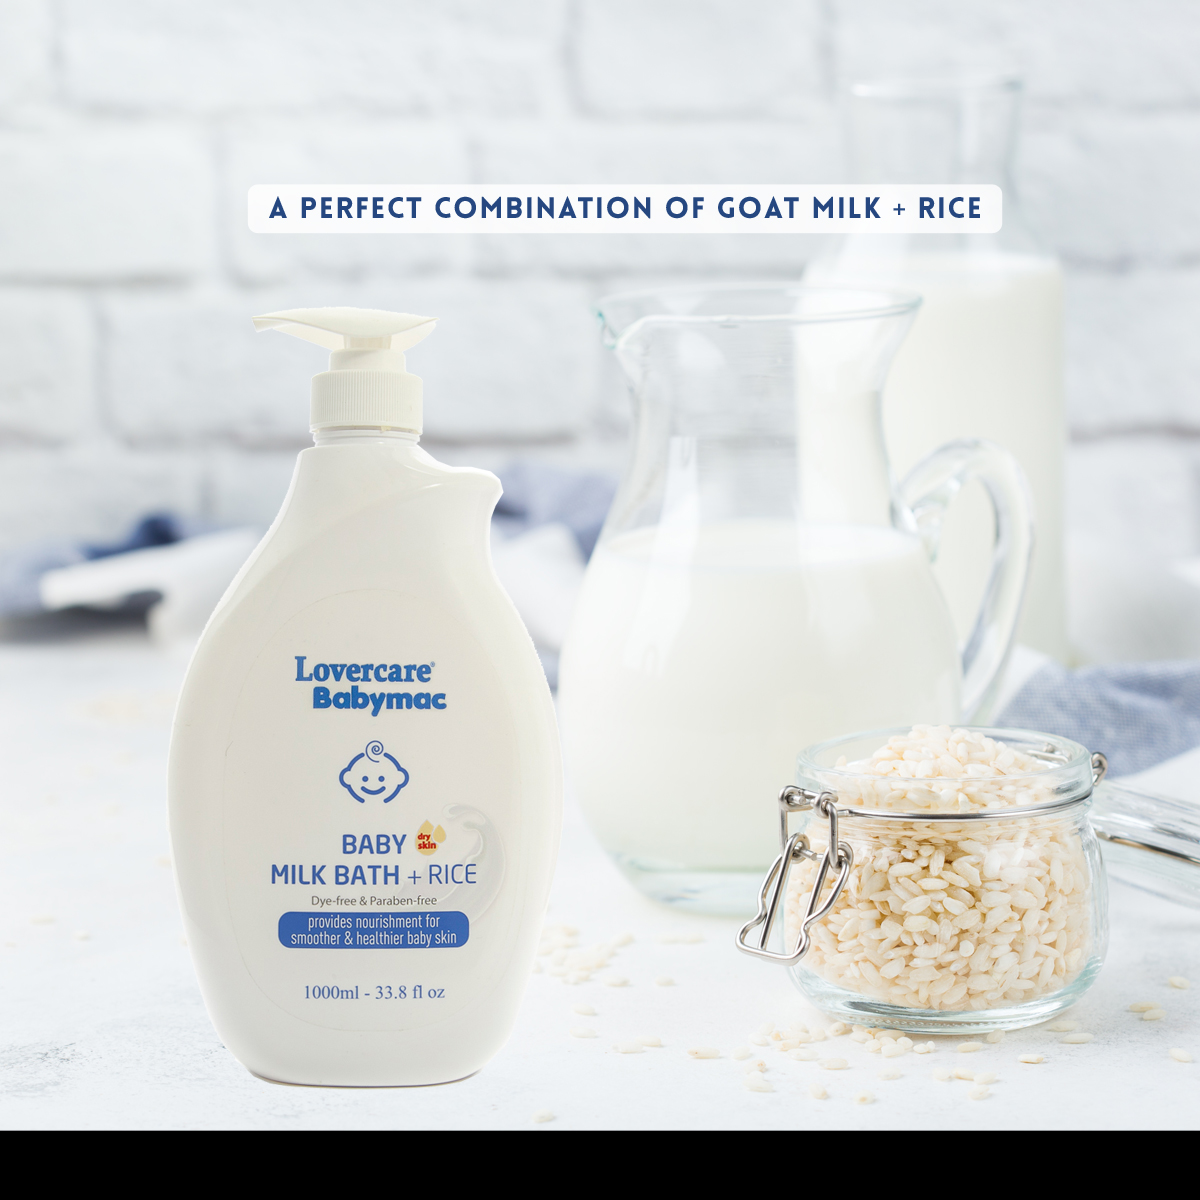 🐐 Indulge in the epitome of refinement with our latest offering from the LoverCare line - the Babymac Goat's Milk Bath With Rice! 📞 1855 588 9900 📧 sales@ausco-inc.com 🌐bit.ly/3iPs0ca #ricemilk #goatmilk #babybath #babyshampoo #babymilkbath #babyshowergel